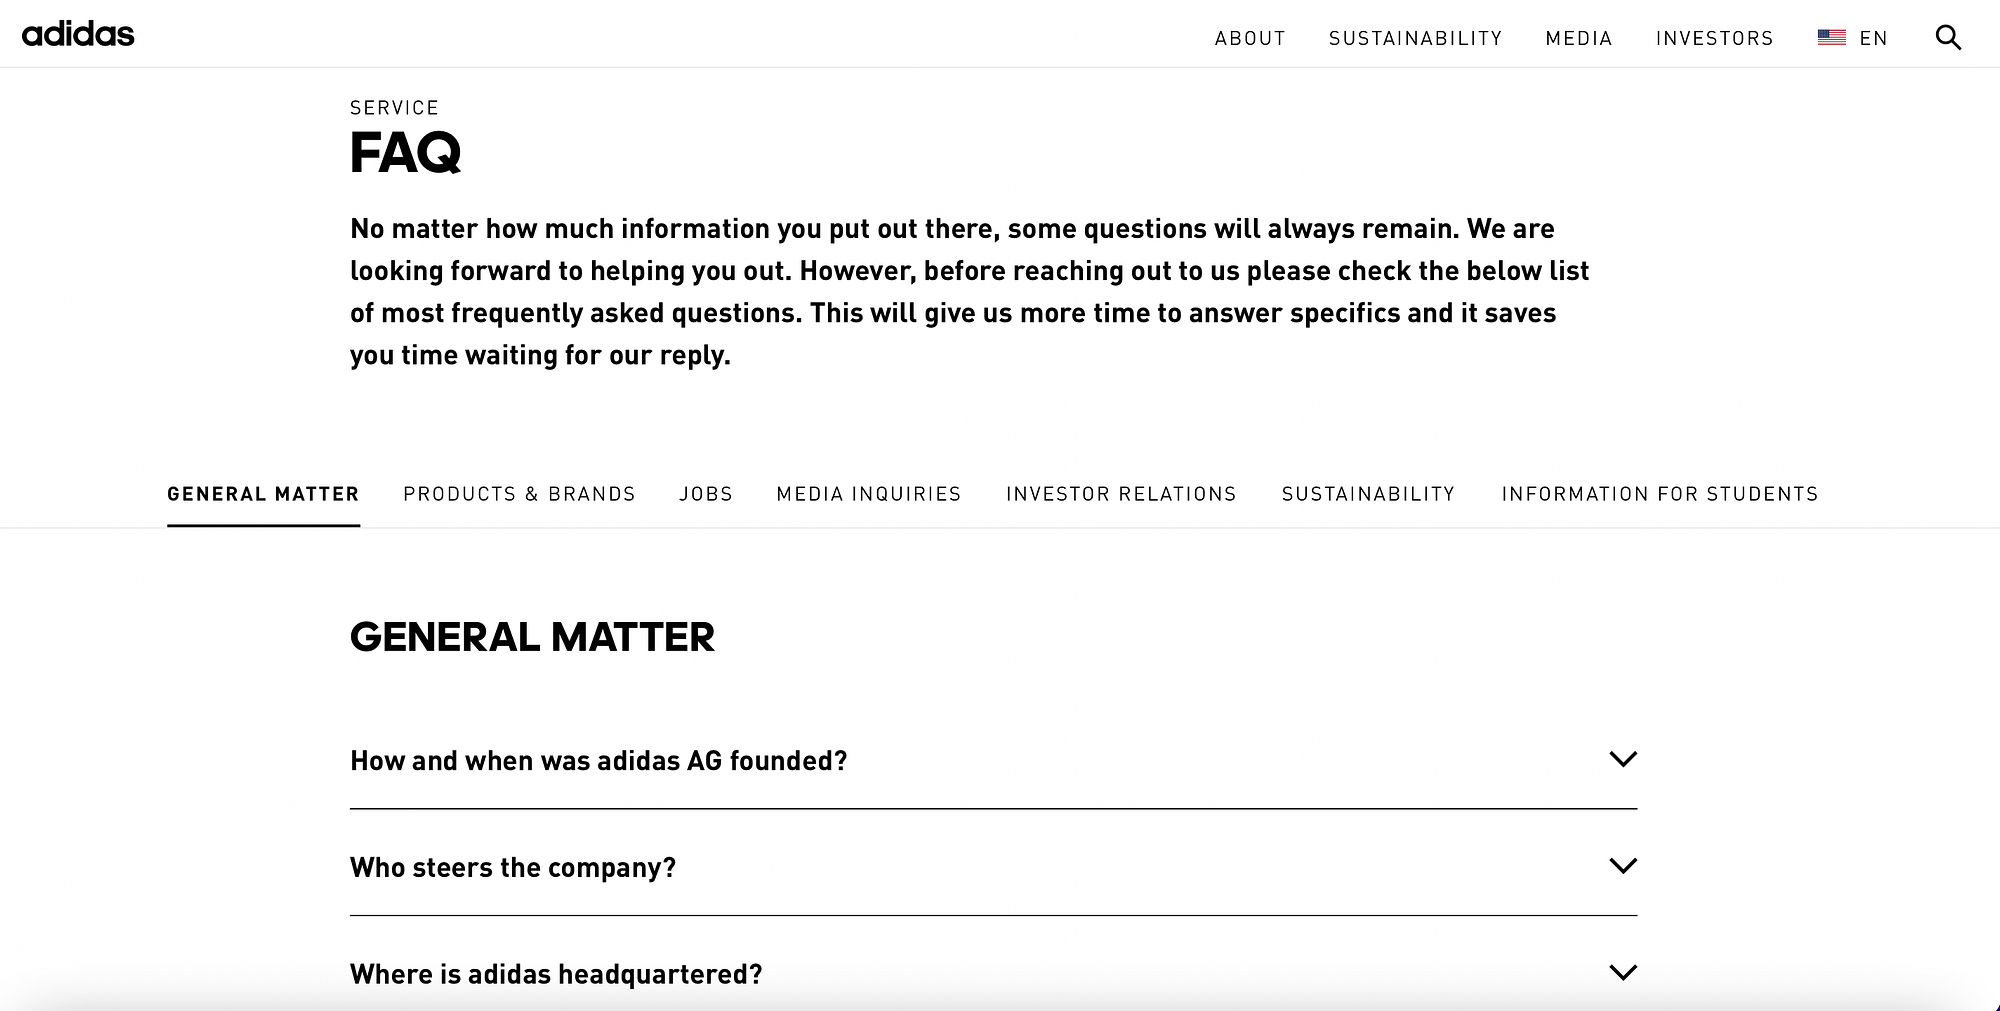 FAQ page examples: Adidas FAQ page, "General Matter" area